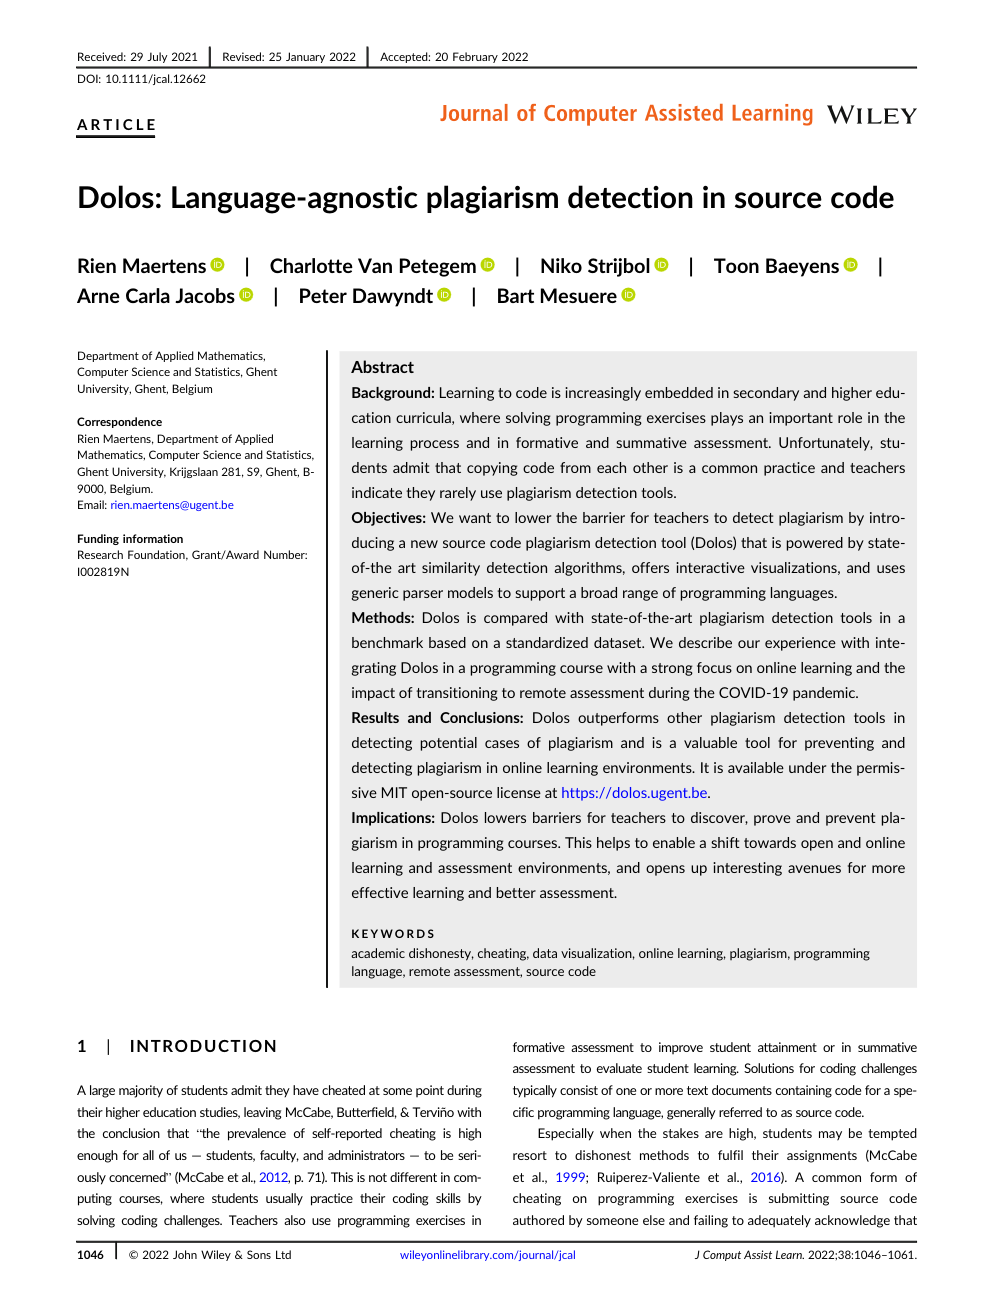 Image of the first page of the article with title Dolos: Language-agnostic plagiarism detection in source code